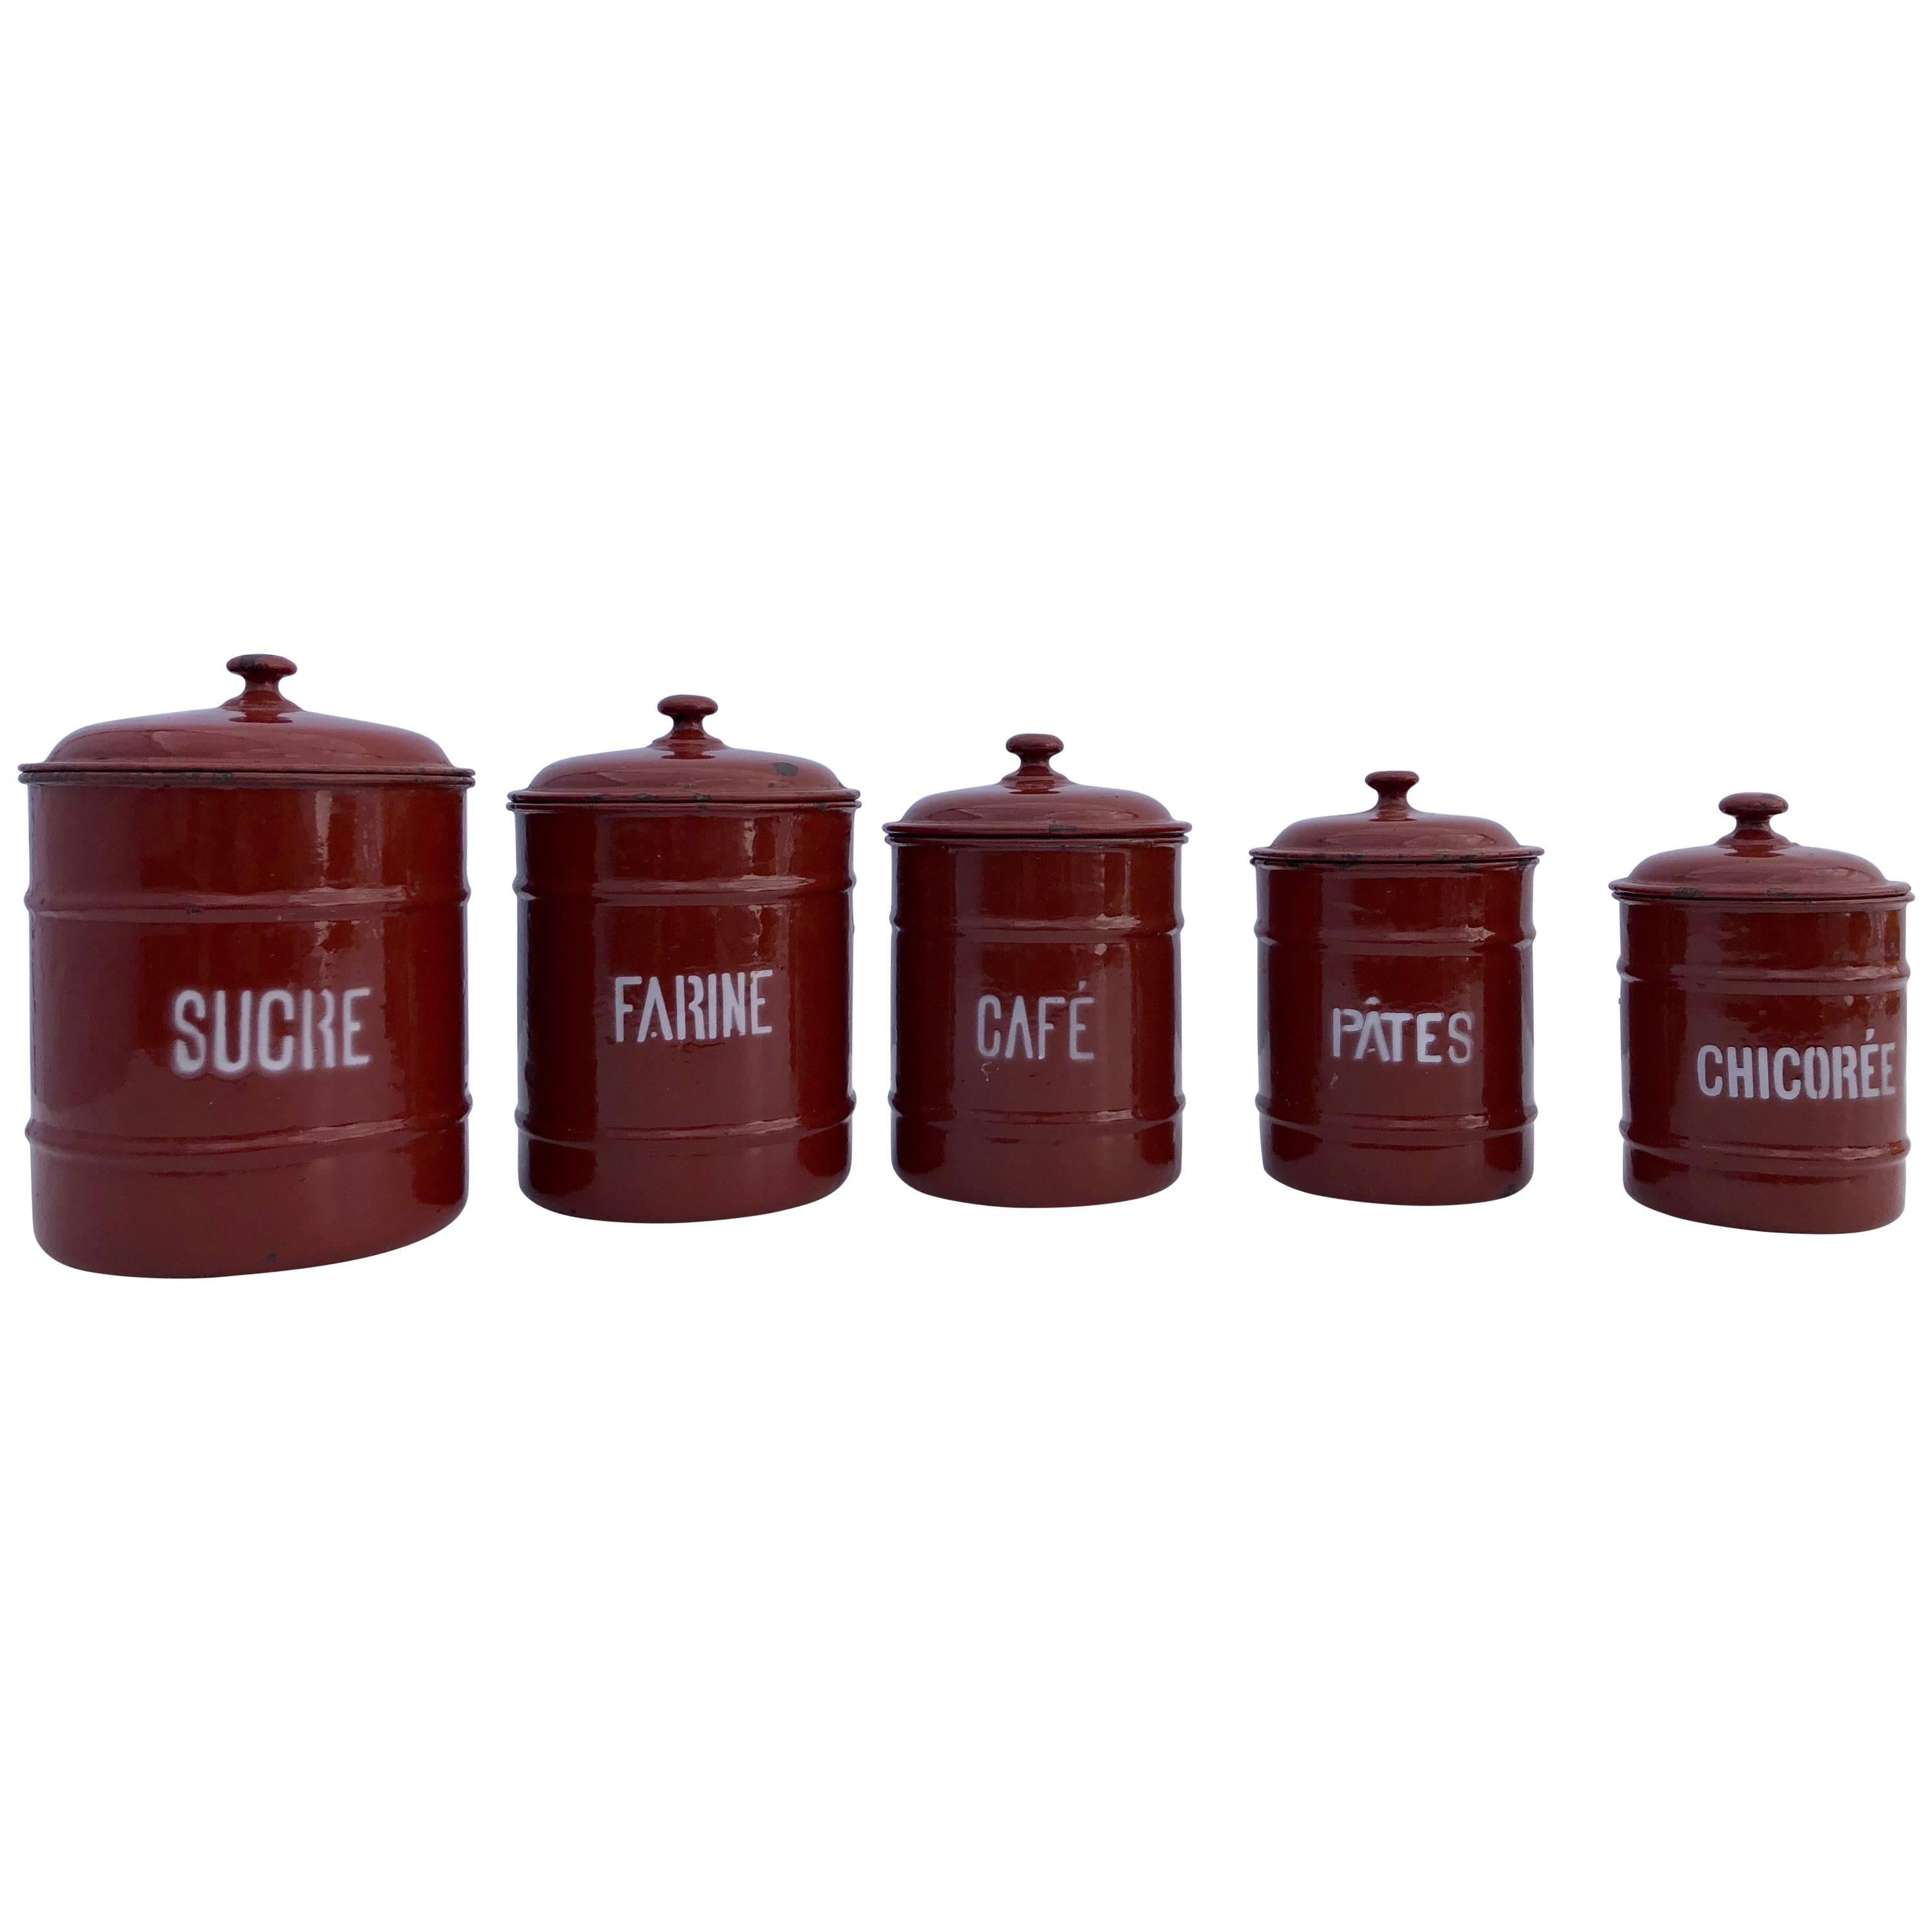 French Enamelware Cannister Set of Five with Lids in Brown Color, Mid-1900s For Sale